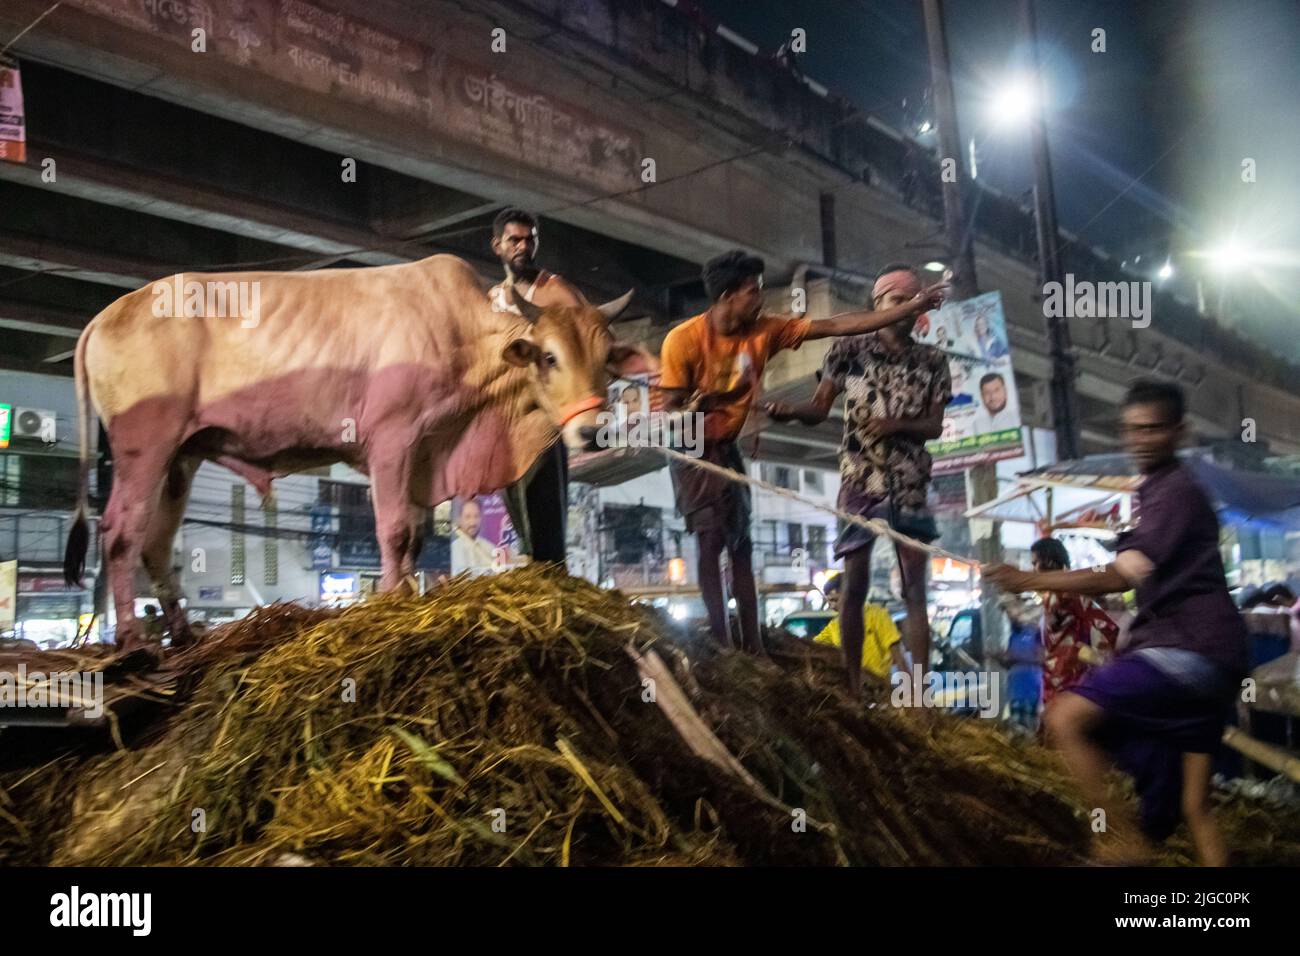 Vendors selling cows in the market for EID-UL-ADHA. EID-UL-ADHA is 2nd biggest festival for Muslims. People sacrifice cows and goats in this festival. Stock Photo